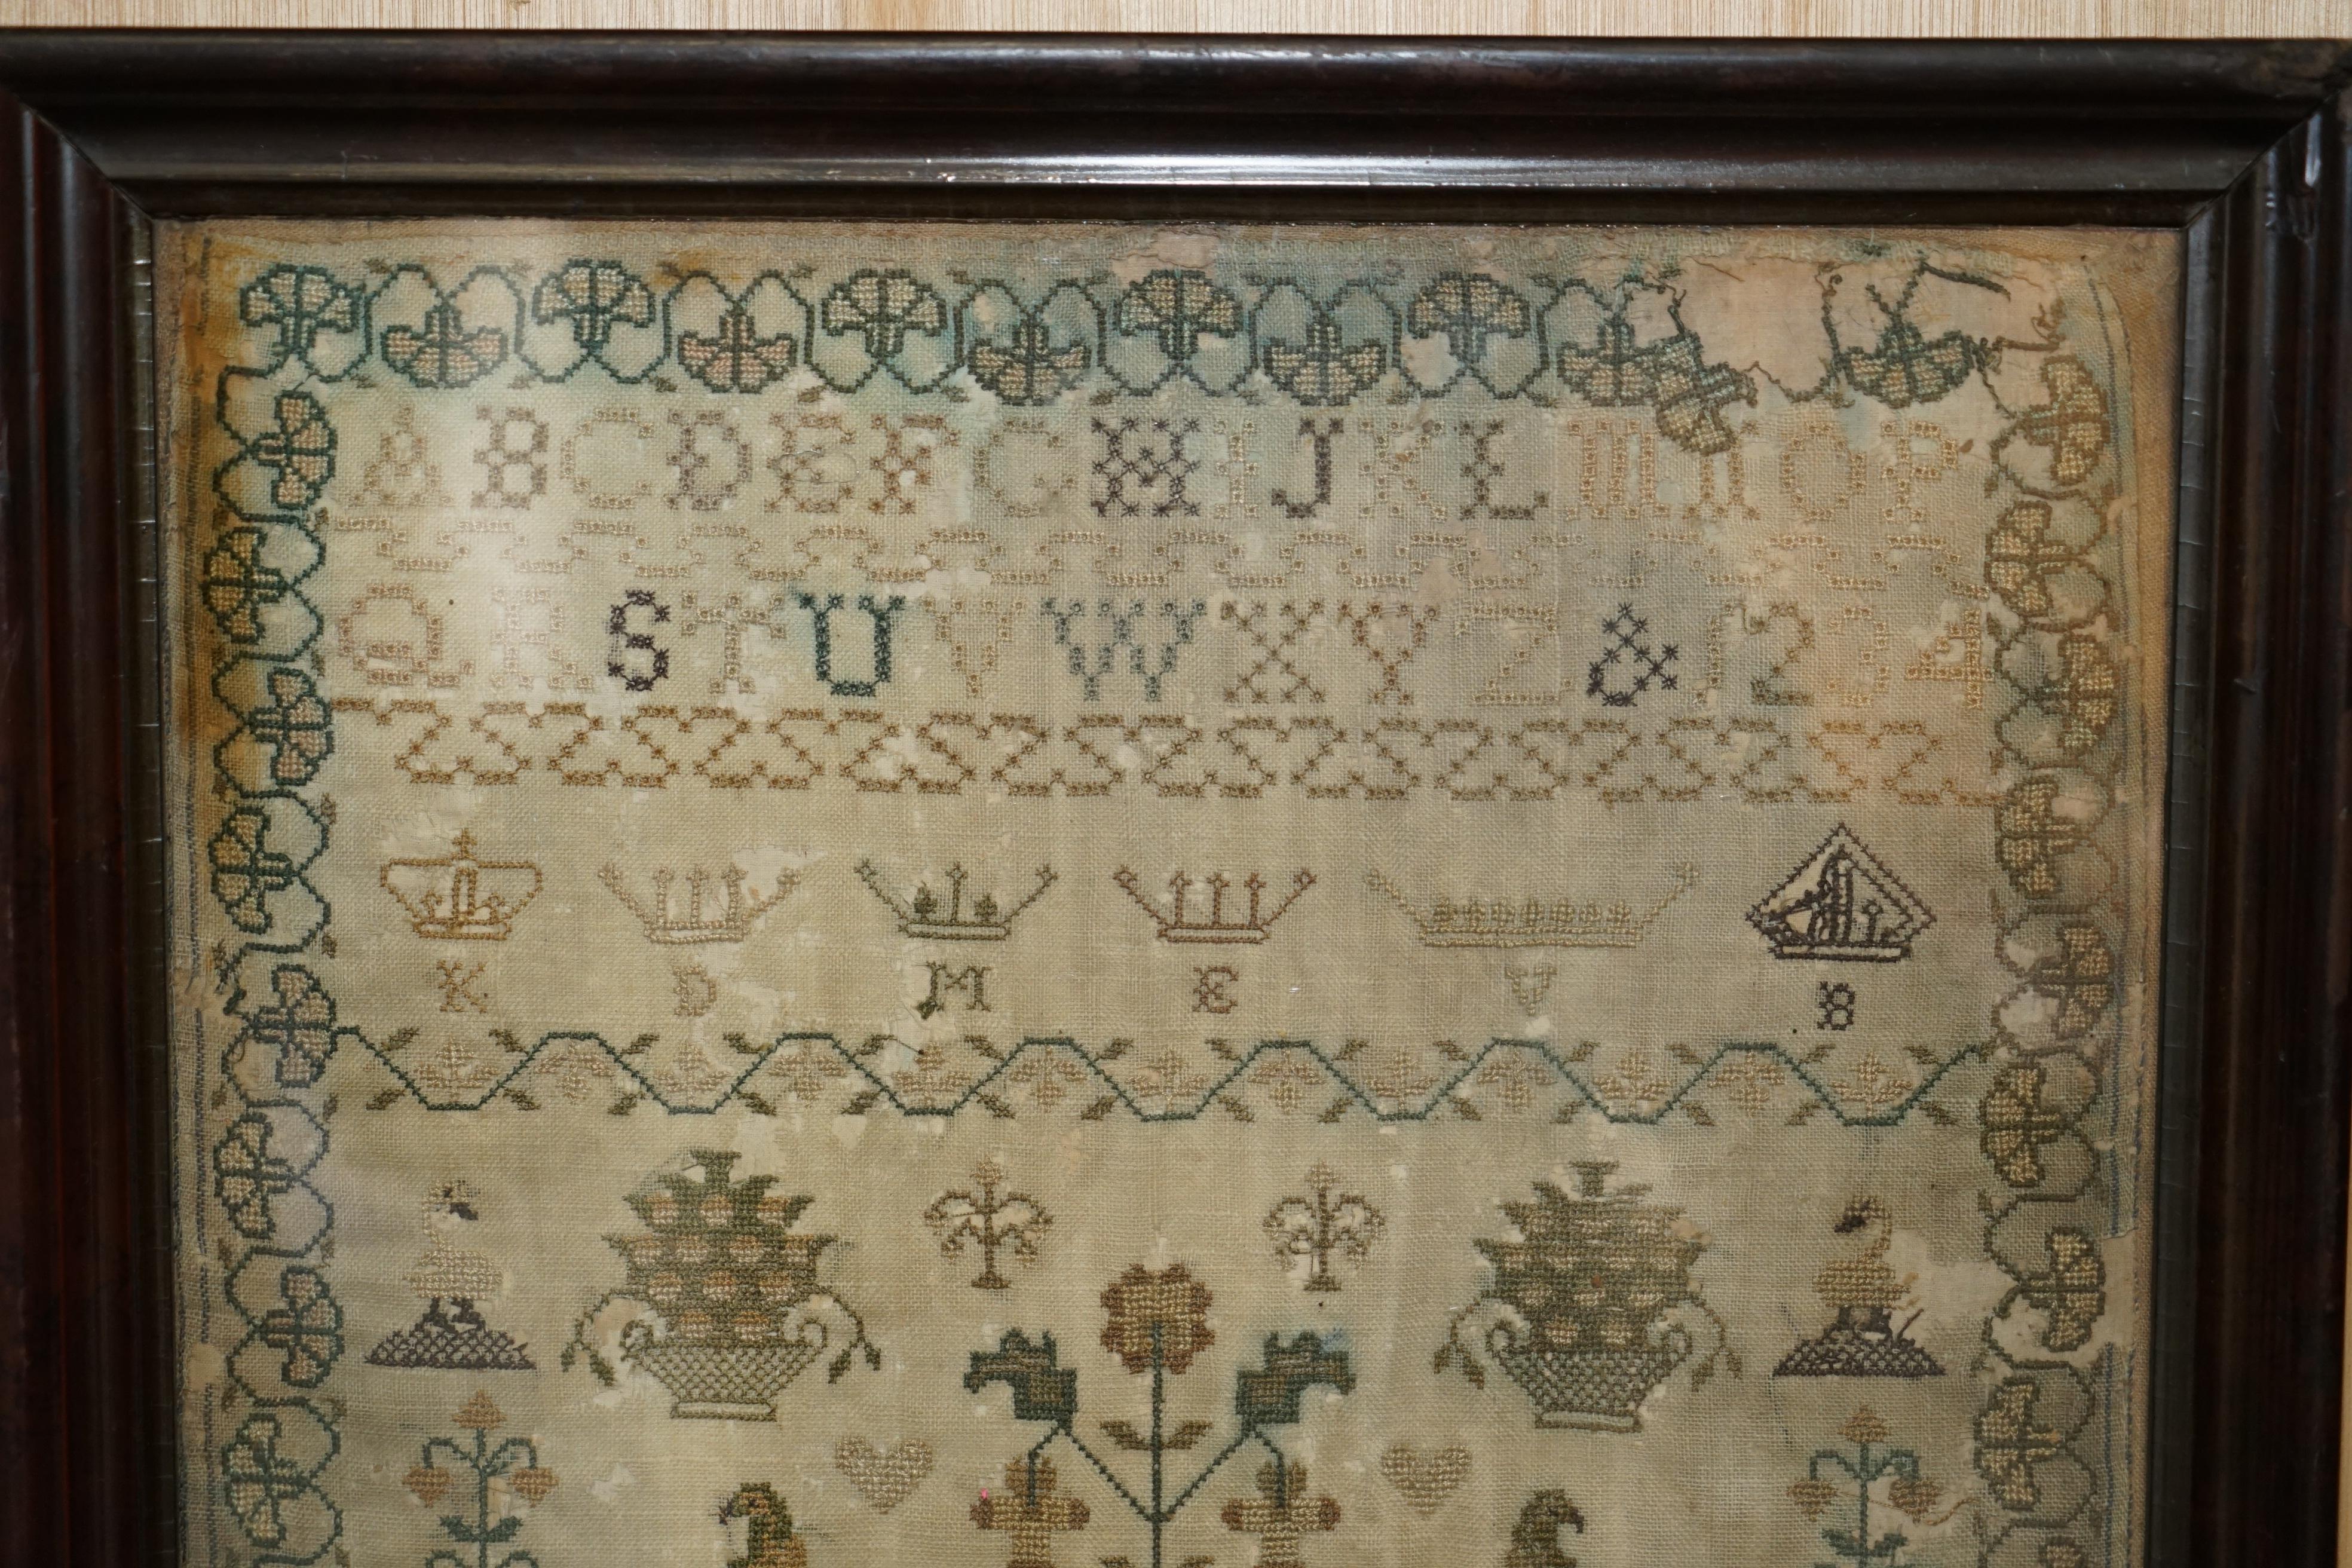 Royal House Antiques

Royal House Antiques is delighted to offer for sale this rather stunning, 1838 dated needlework sampler made in the second year of Queen Victoria's reign 

I have three others of these samplers for sale, they are dated 1830,